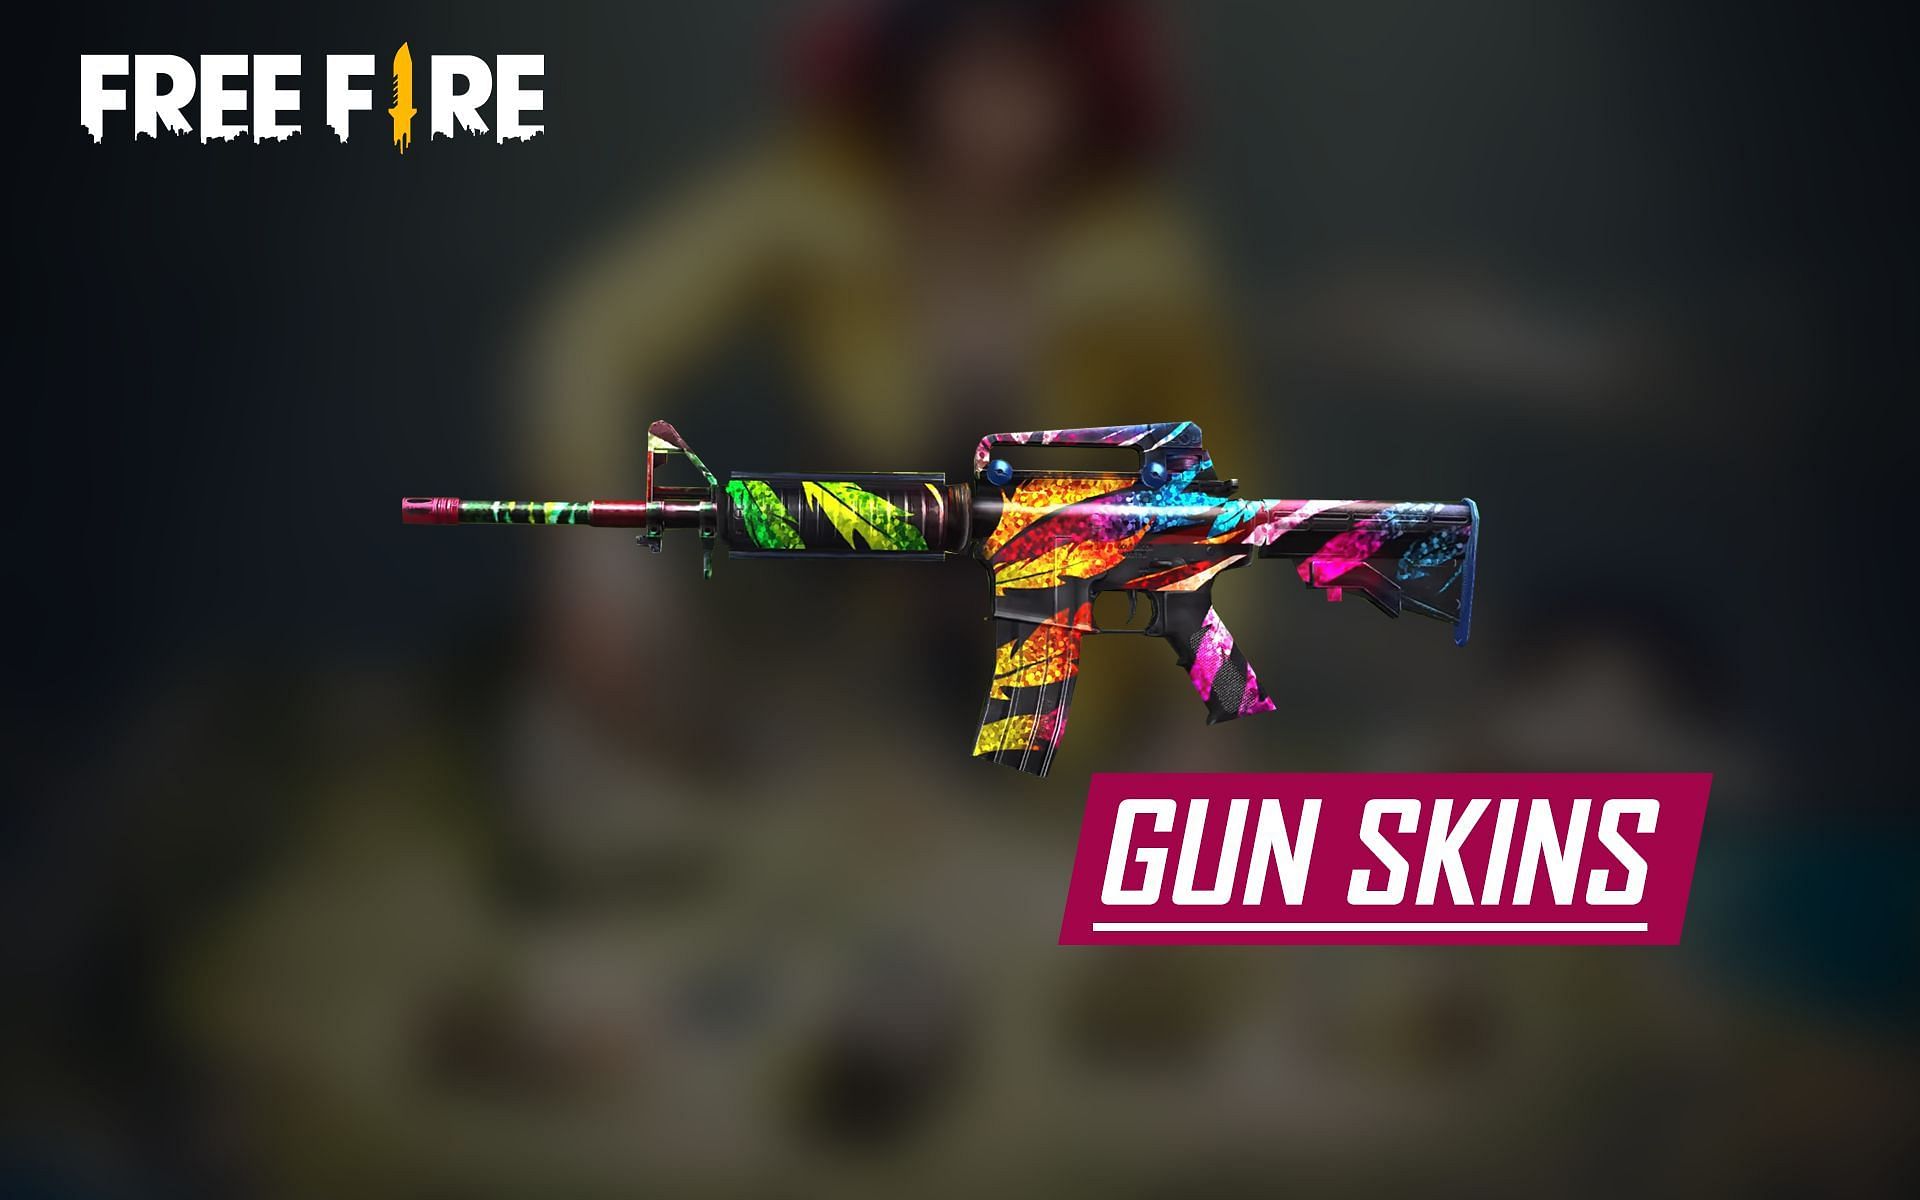 A lot of players have a strong urge to acquire gun skins